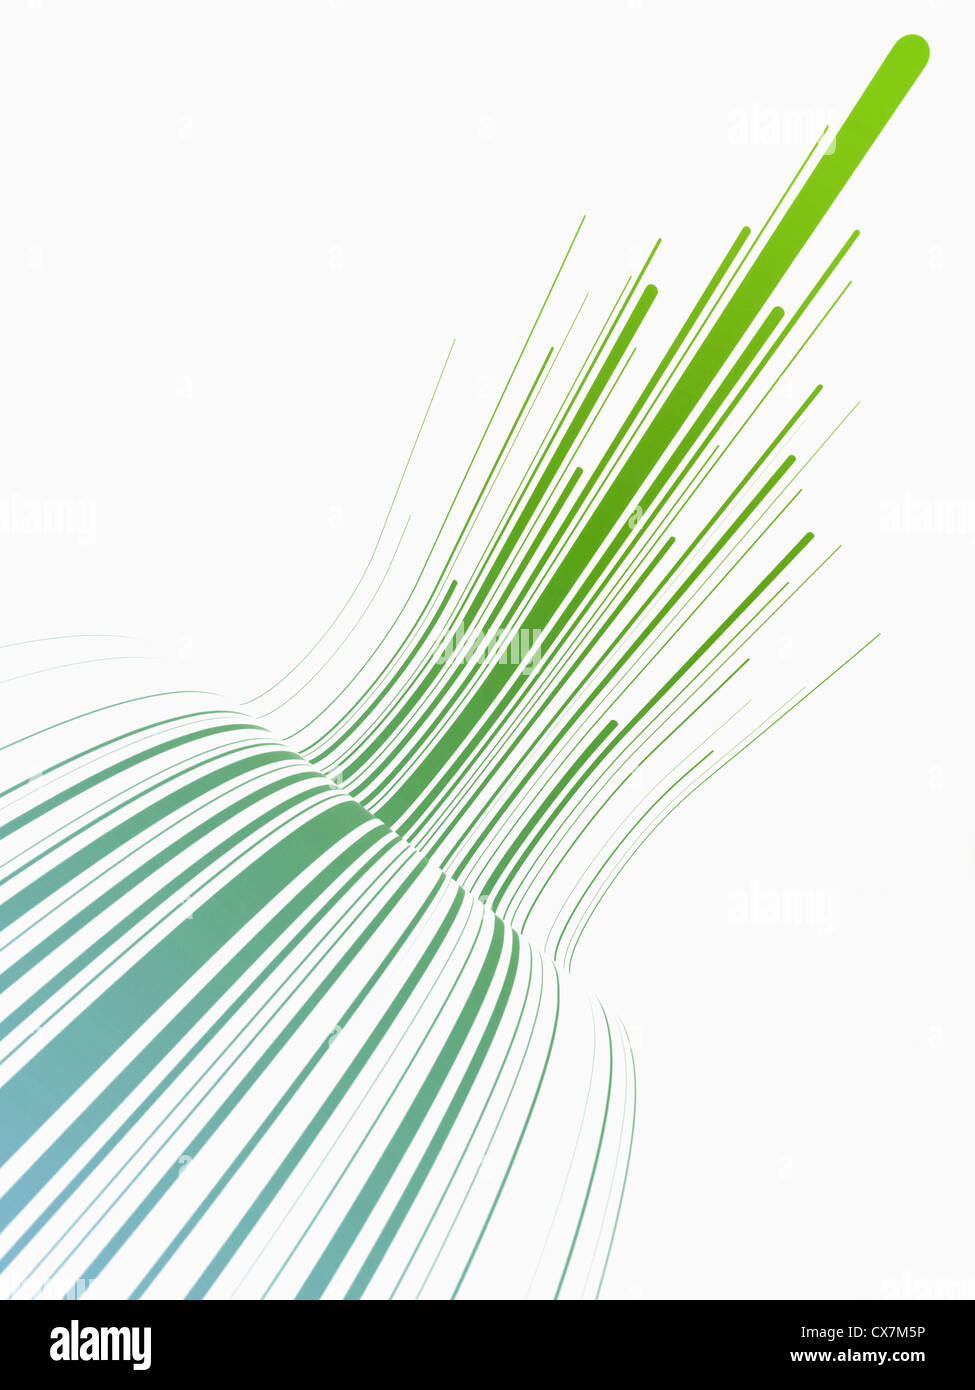 Curved green lines against a white background Stock Photo